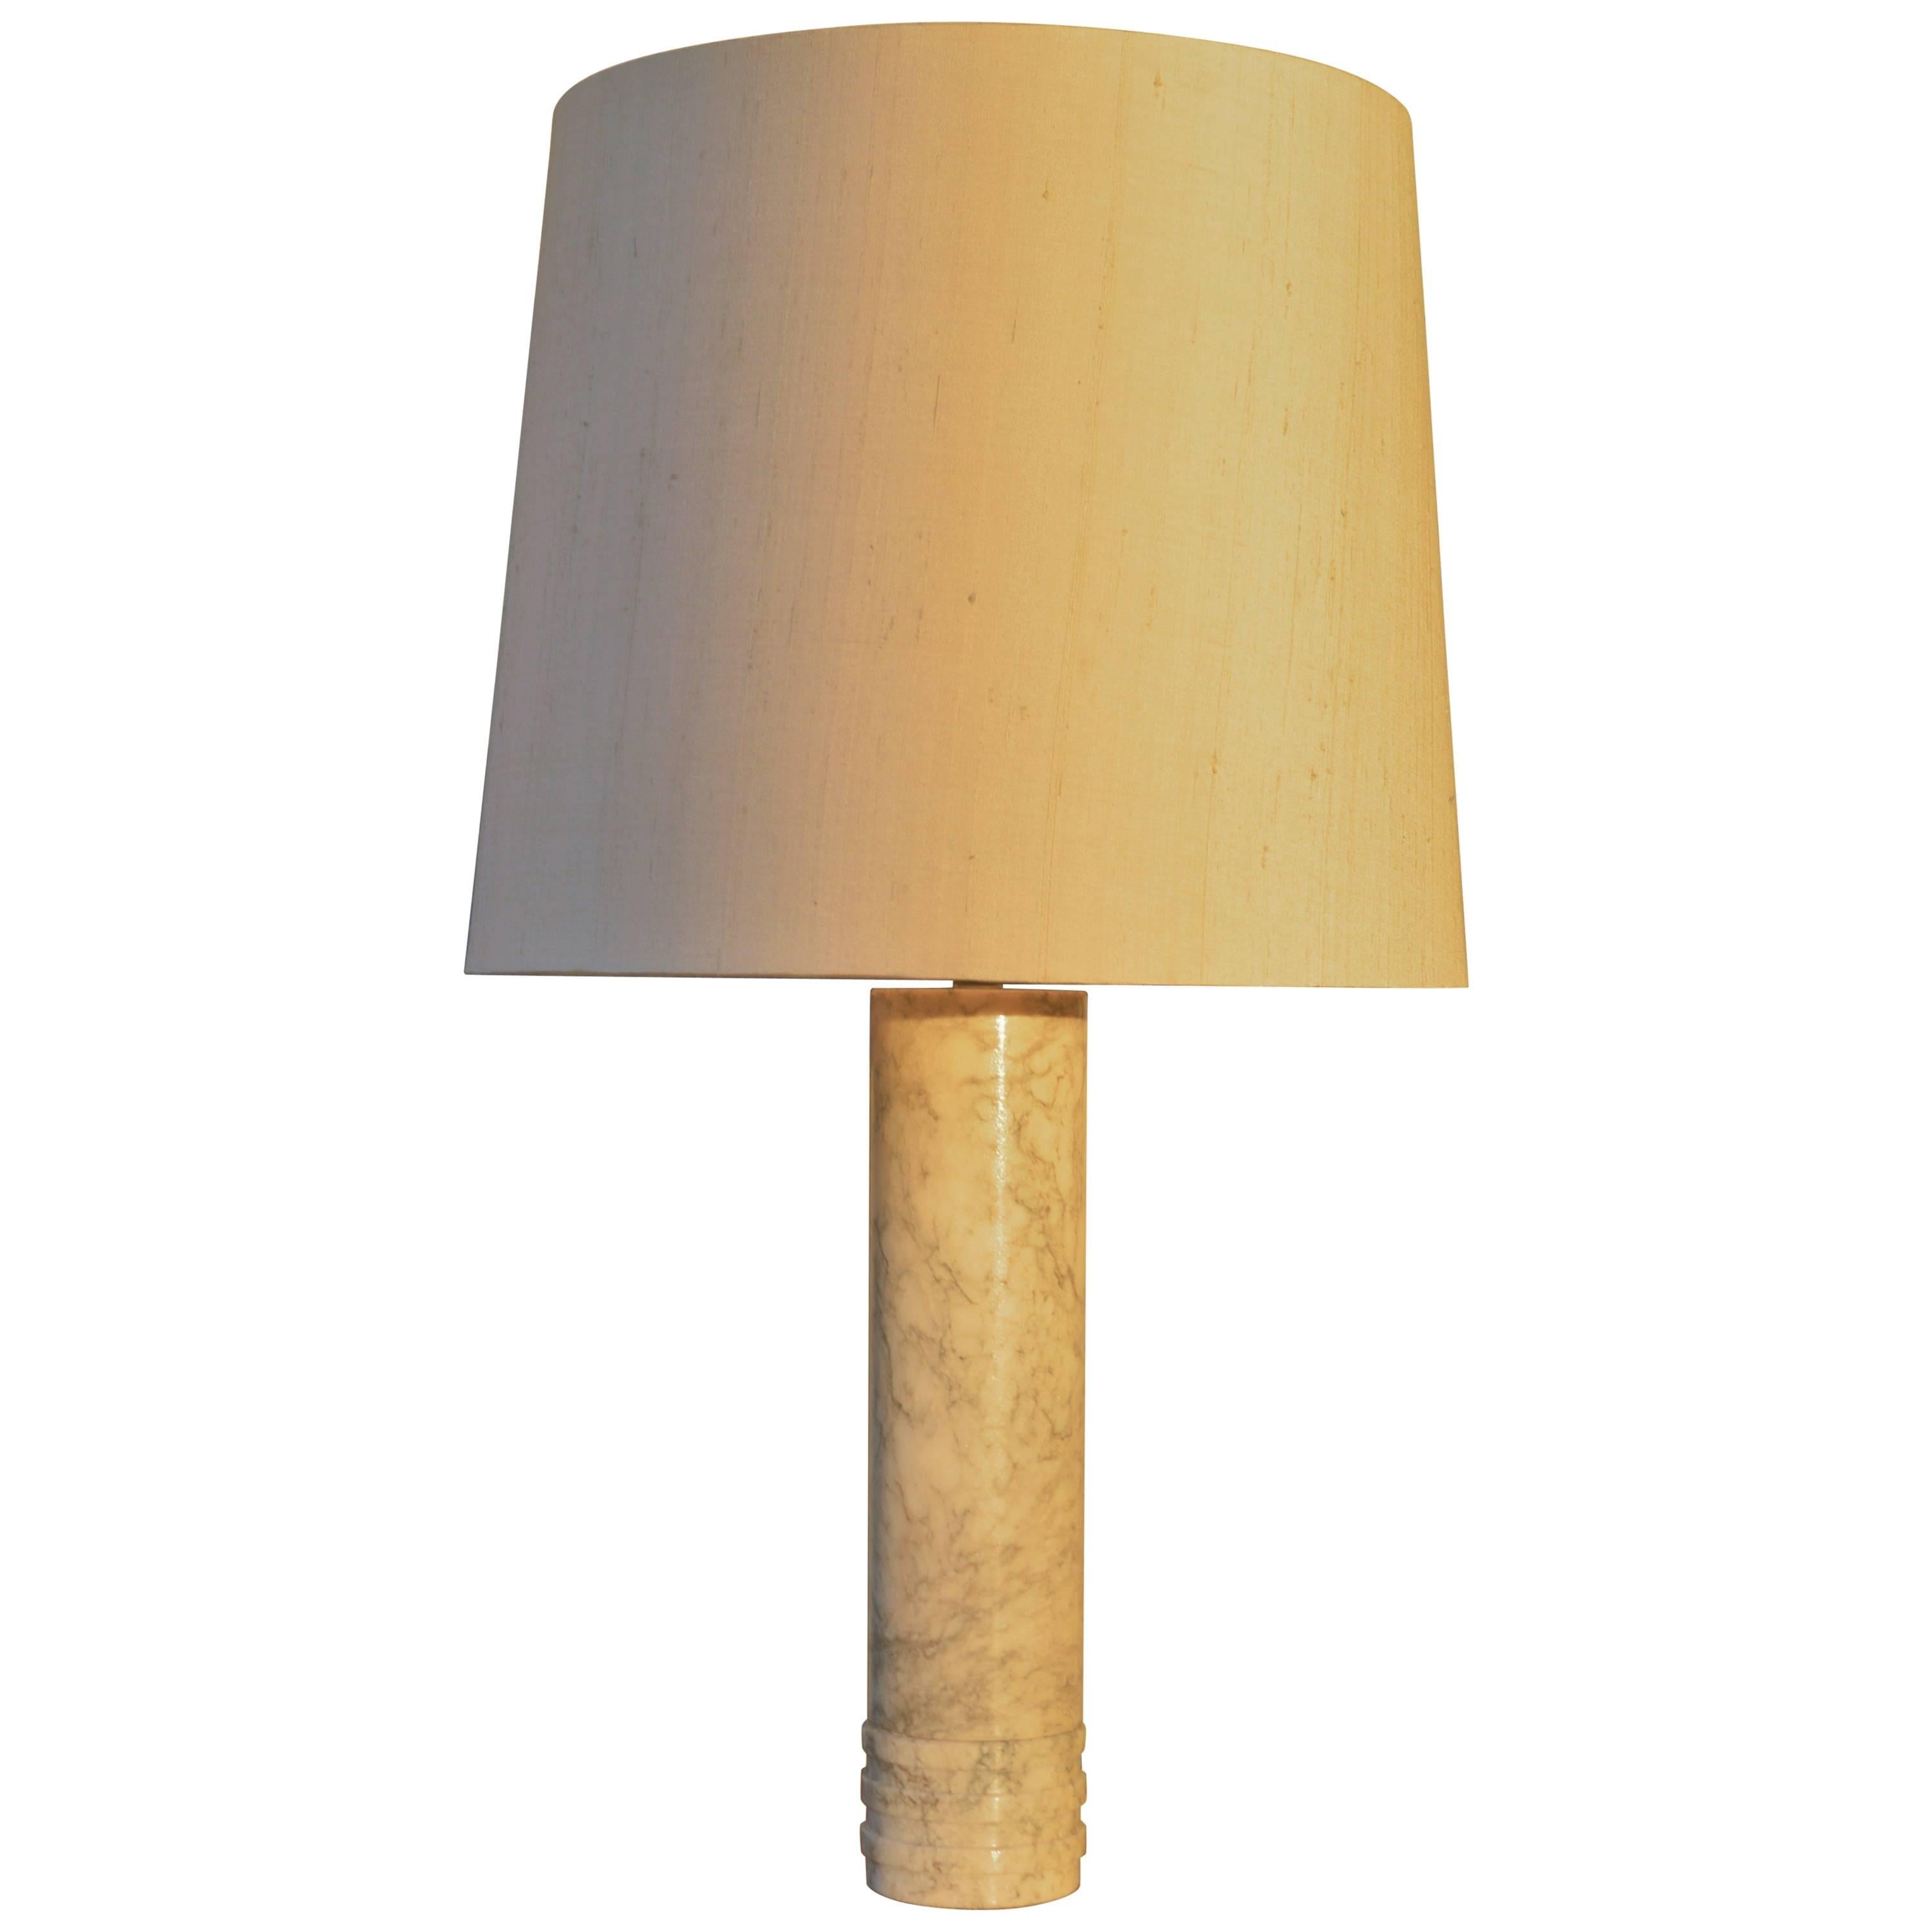 Italian Marble Cylinder Lamp with Silk Barrel Shade, Imported by Holm Sorensen For Sale